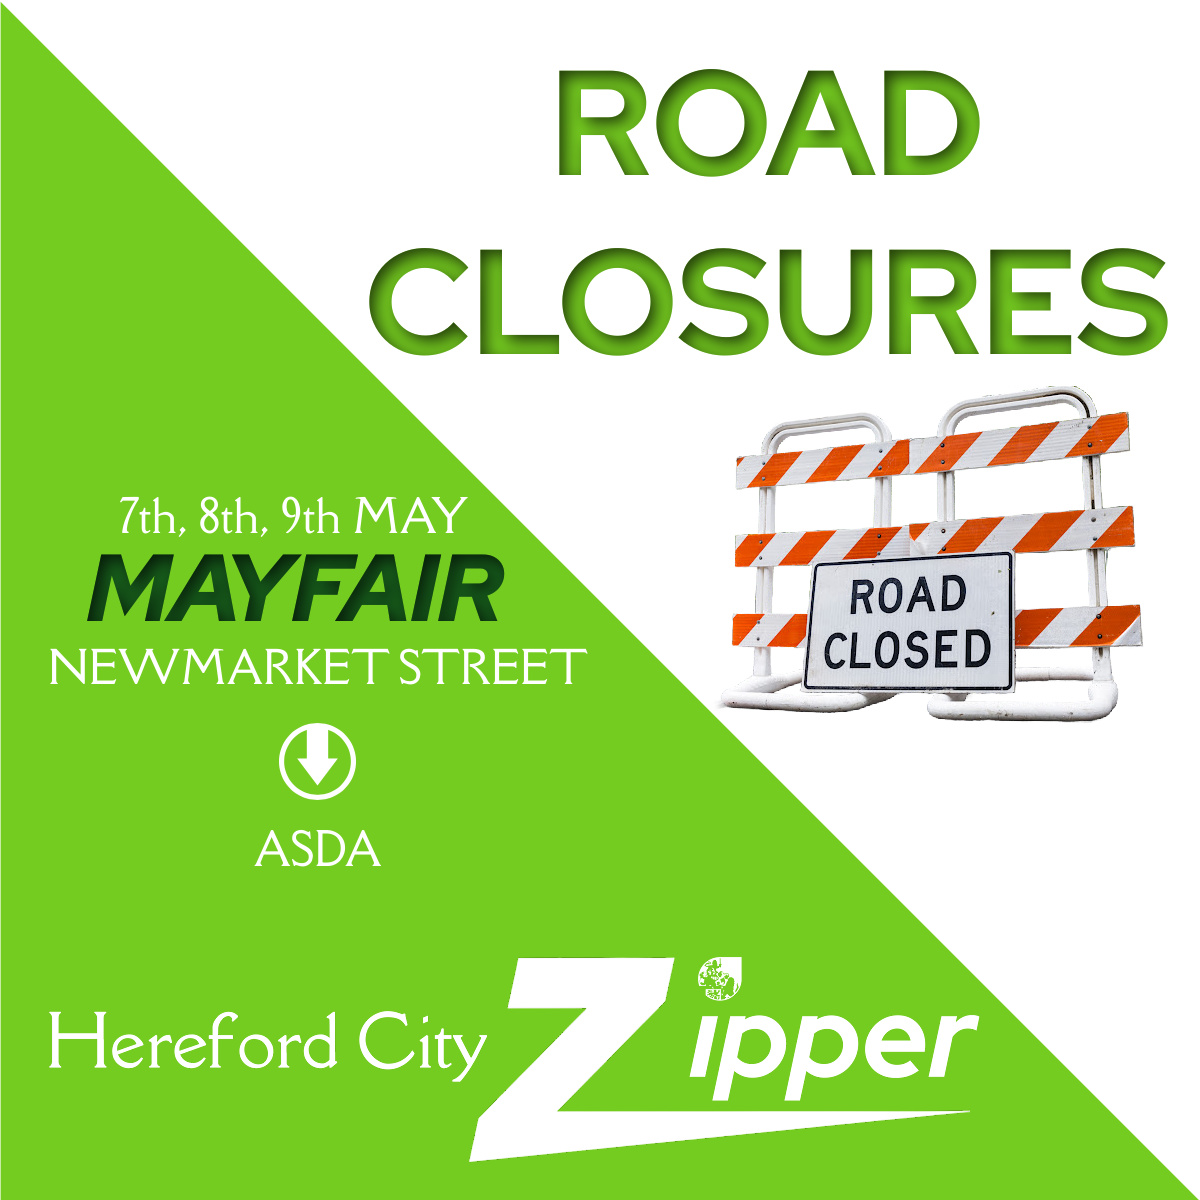 The #Hereford City Zipper bus will be affected by a few of the May Fair Road Closures on Tues 7th to Thurs 9th May. Please note that due to road closures for the May Fair the City Zipper will not be able to serve the stops at Broad Street, Bridge Street or St Martins Street.